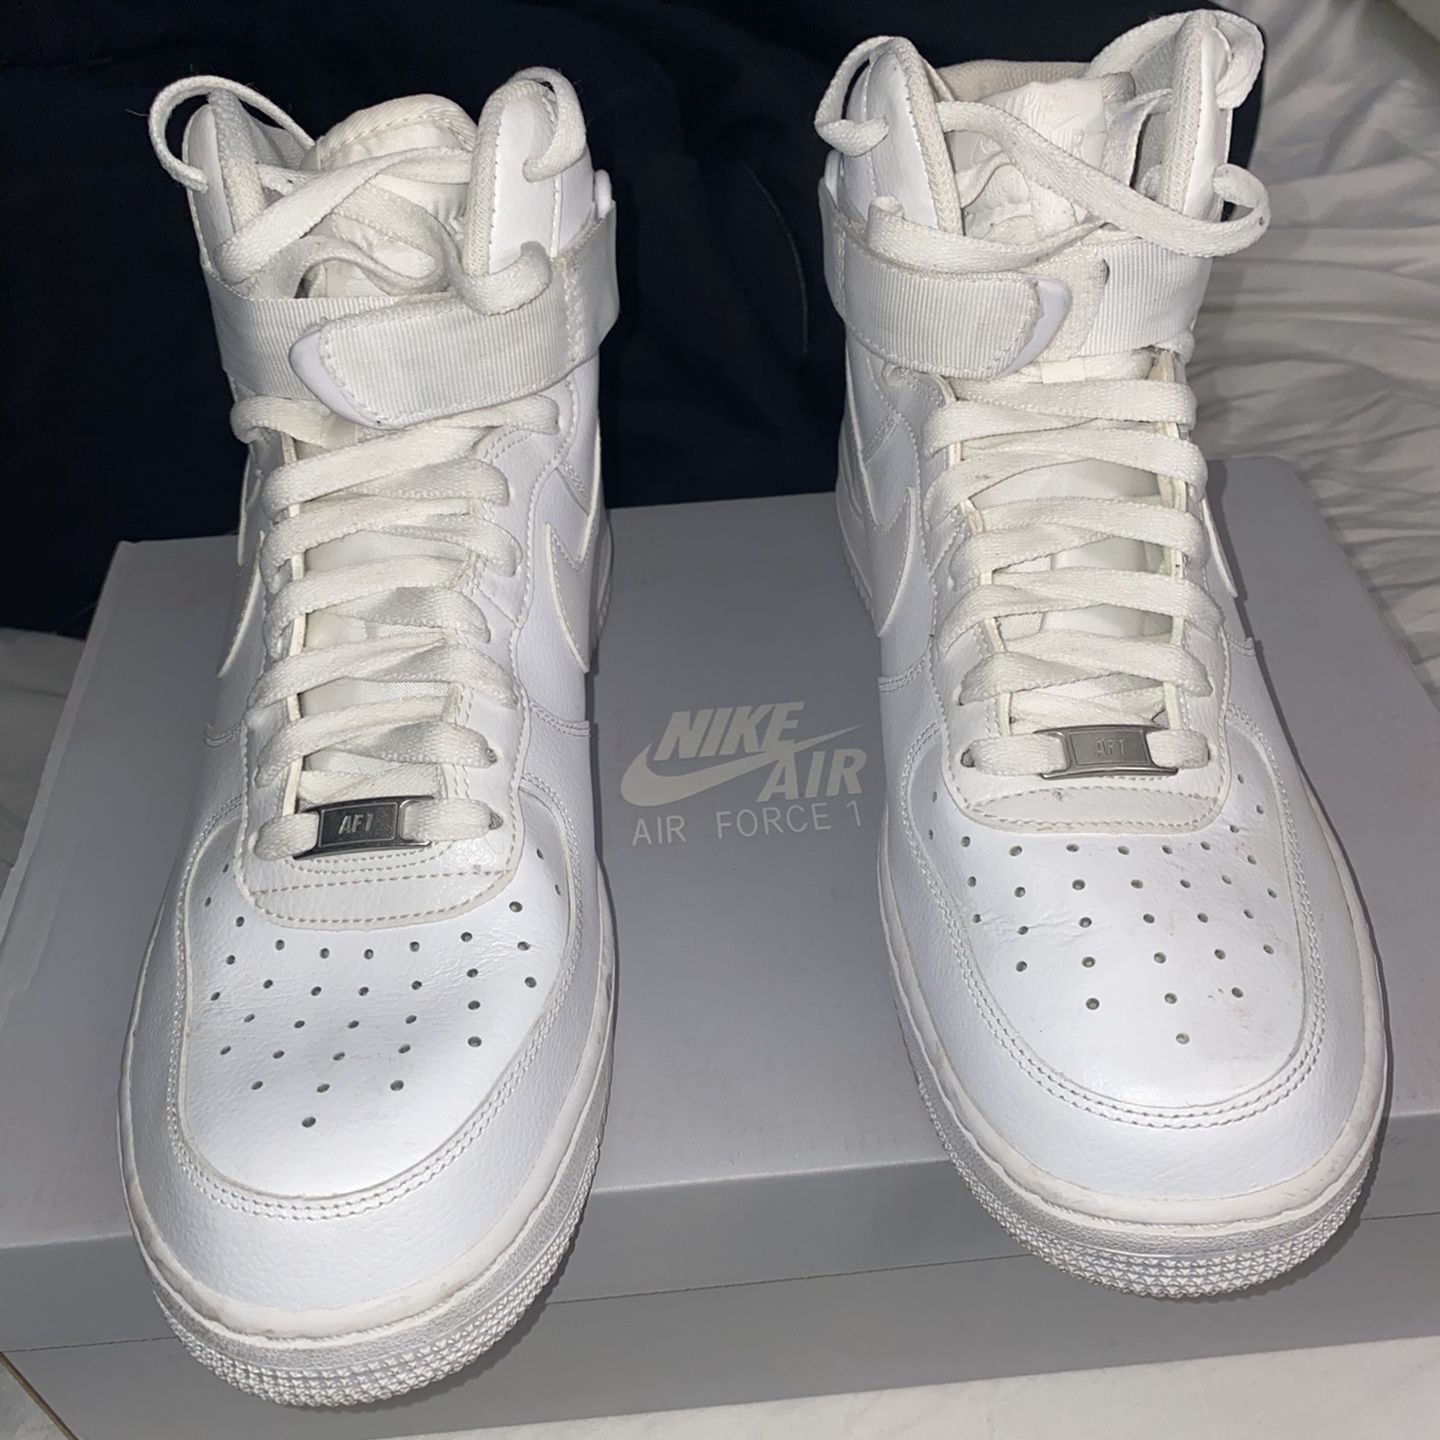 Nike Air Force 1s High Tops Size 9.5 Men’s for Sale in Las Vegas, NV ...